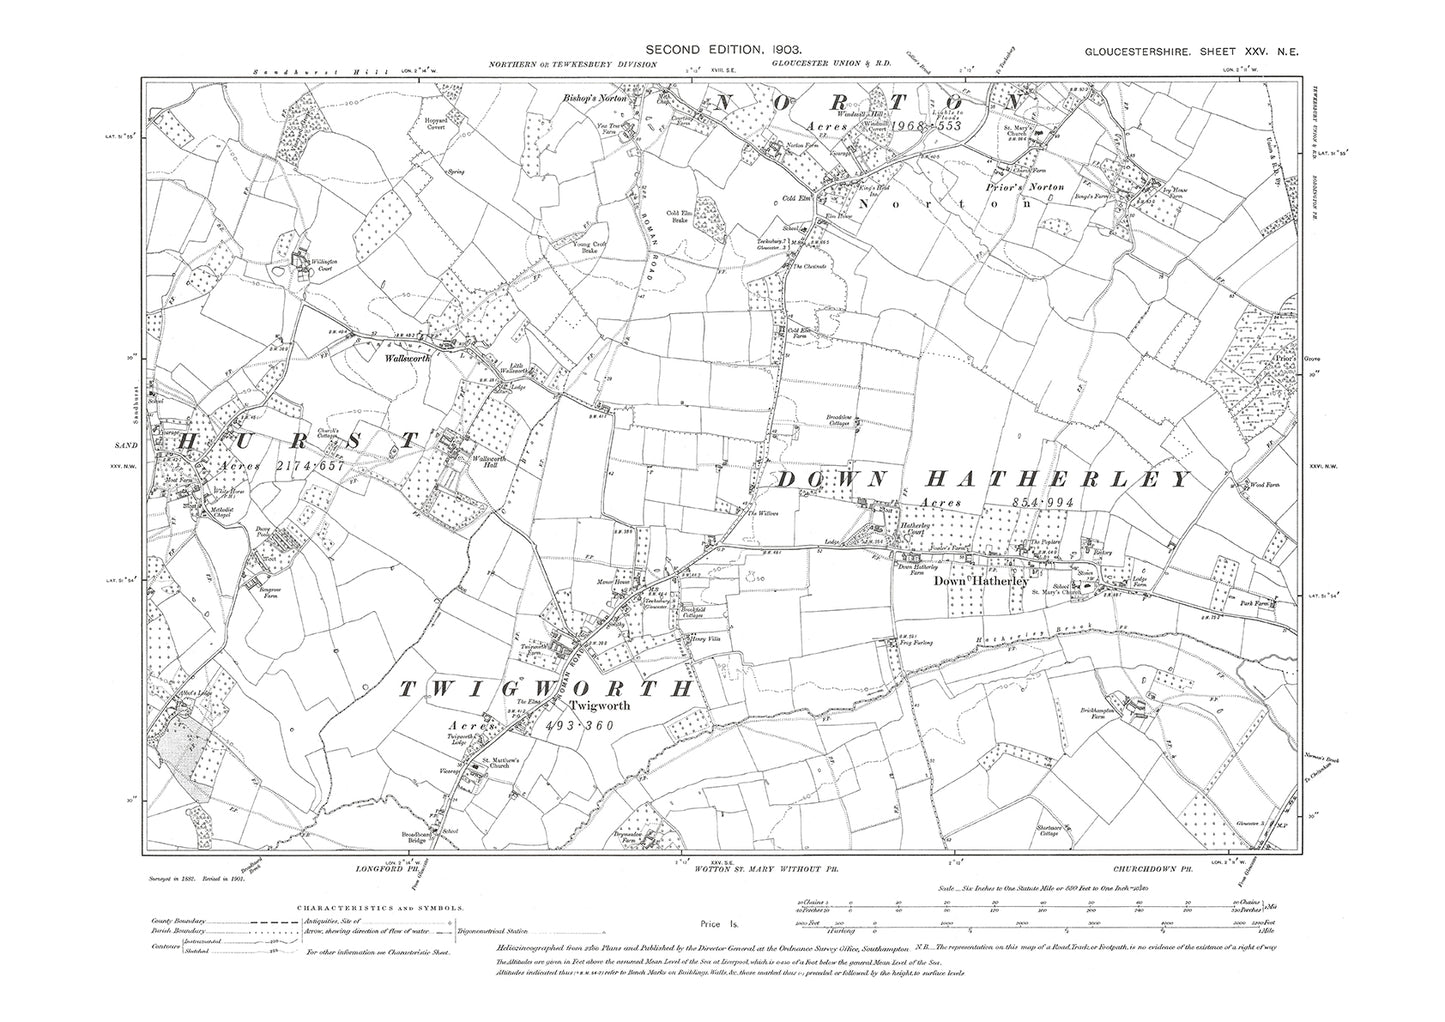 Old OS map dated 1903, showing Norton (south), Sandhurst (east), Twigworth, Down Hatherley in Gloucestershire - 25NE